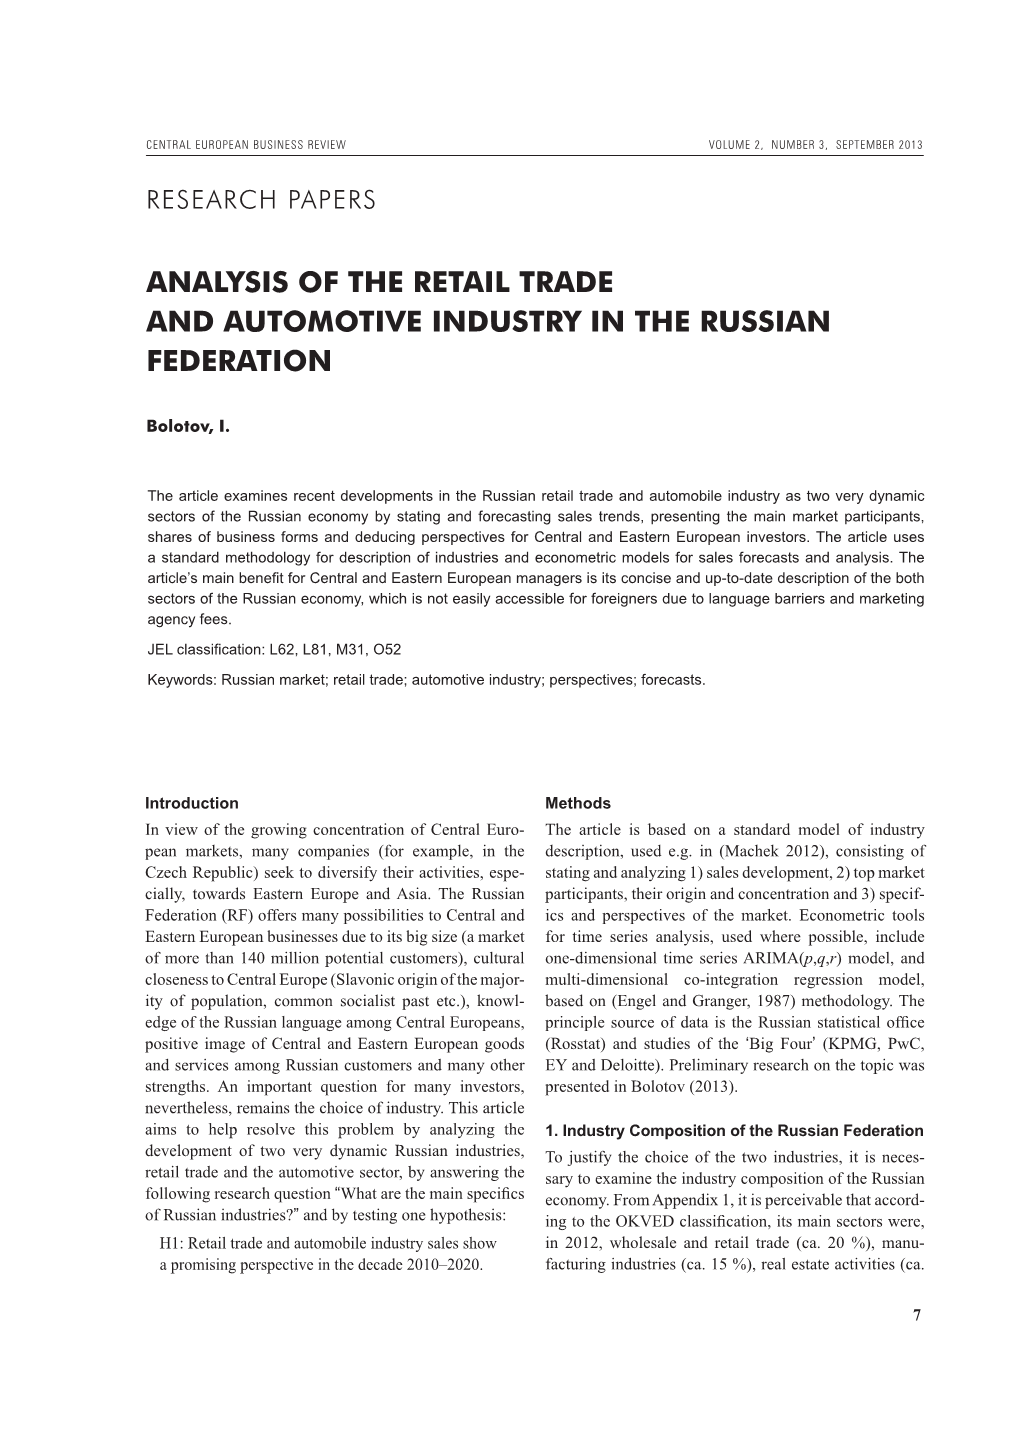 Analysis of the Retail Trade and Automotive Industry in the Russian Federation